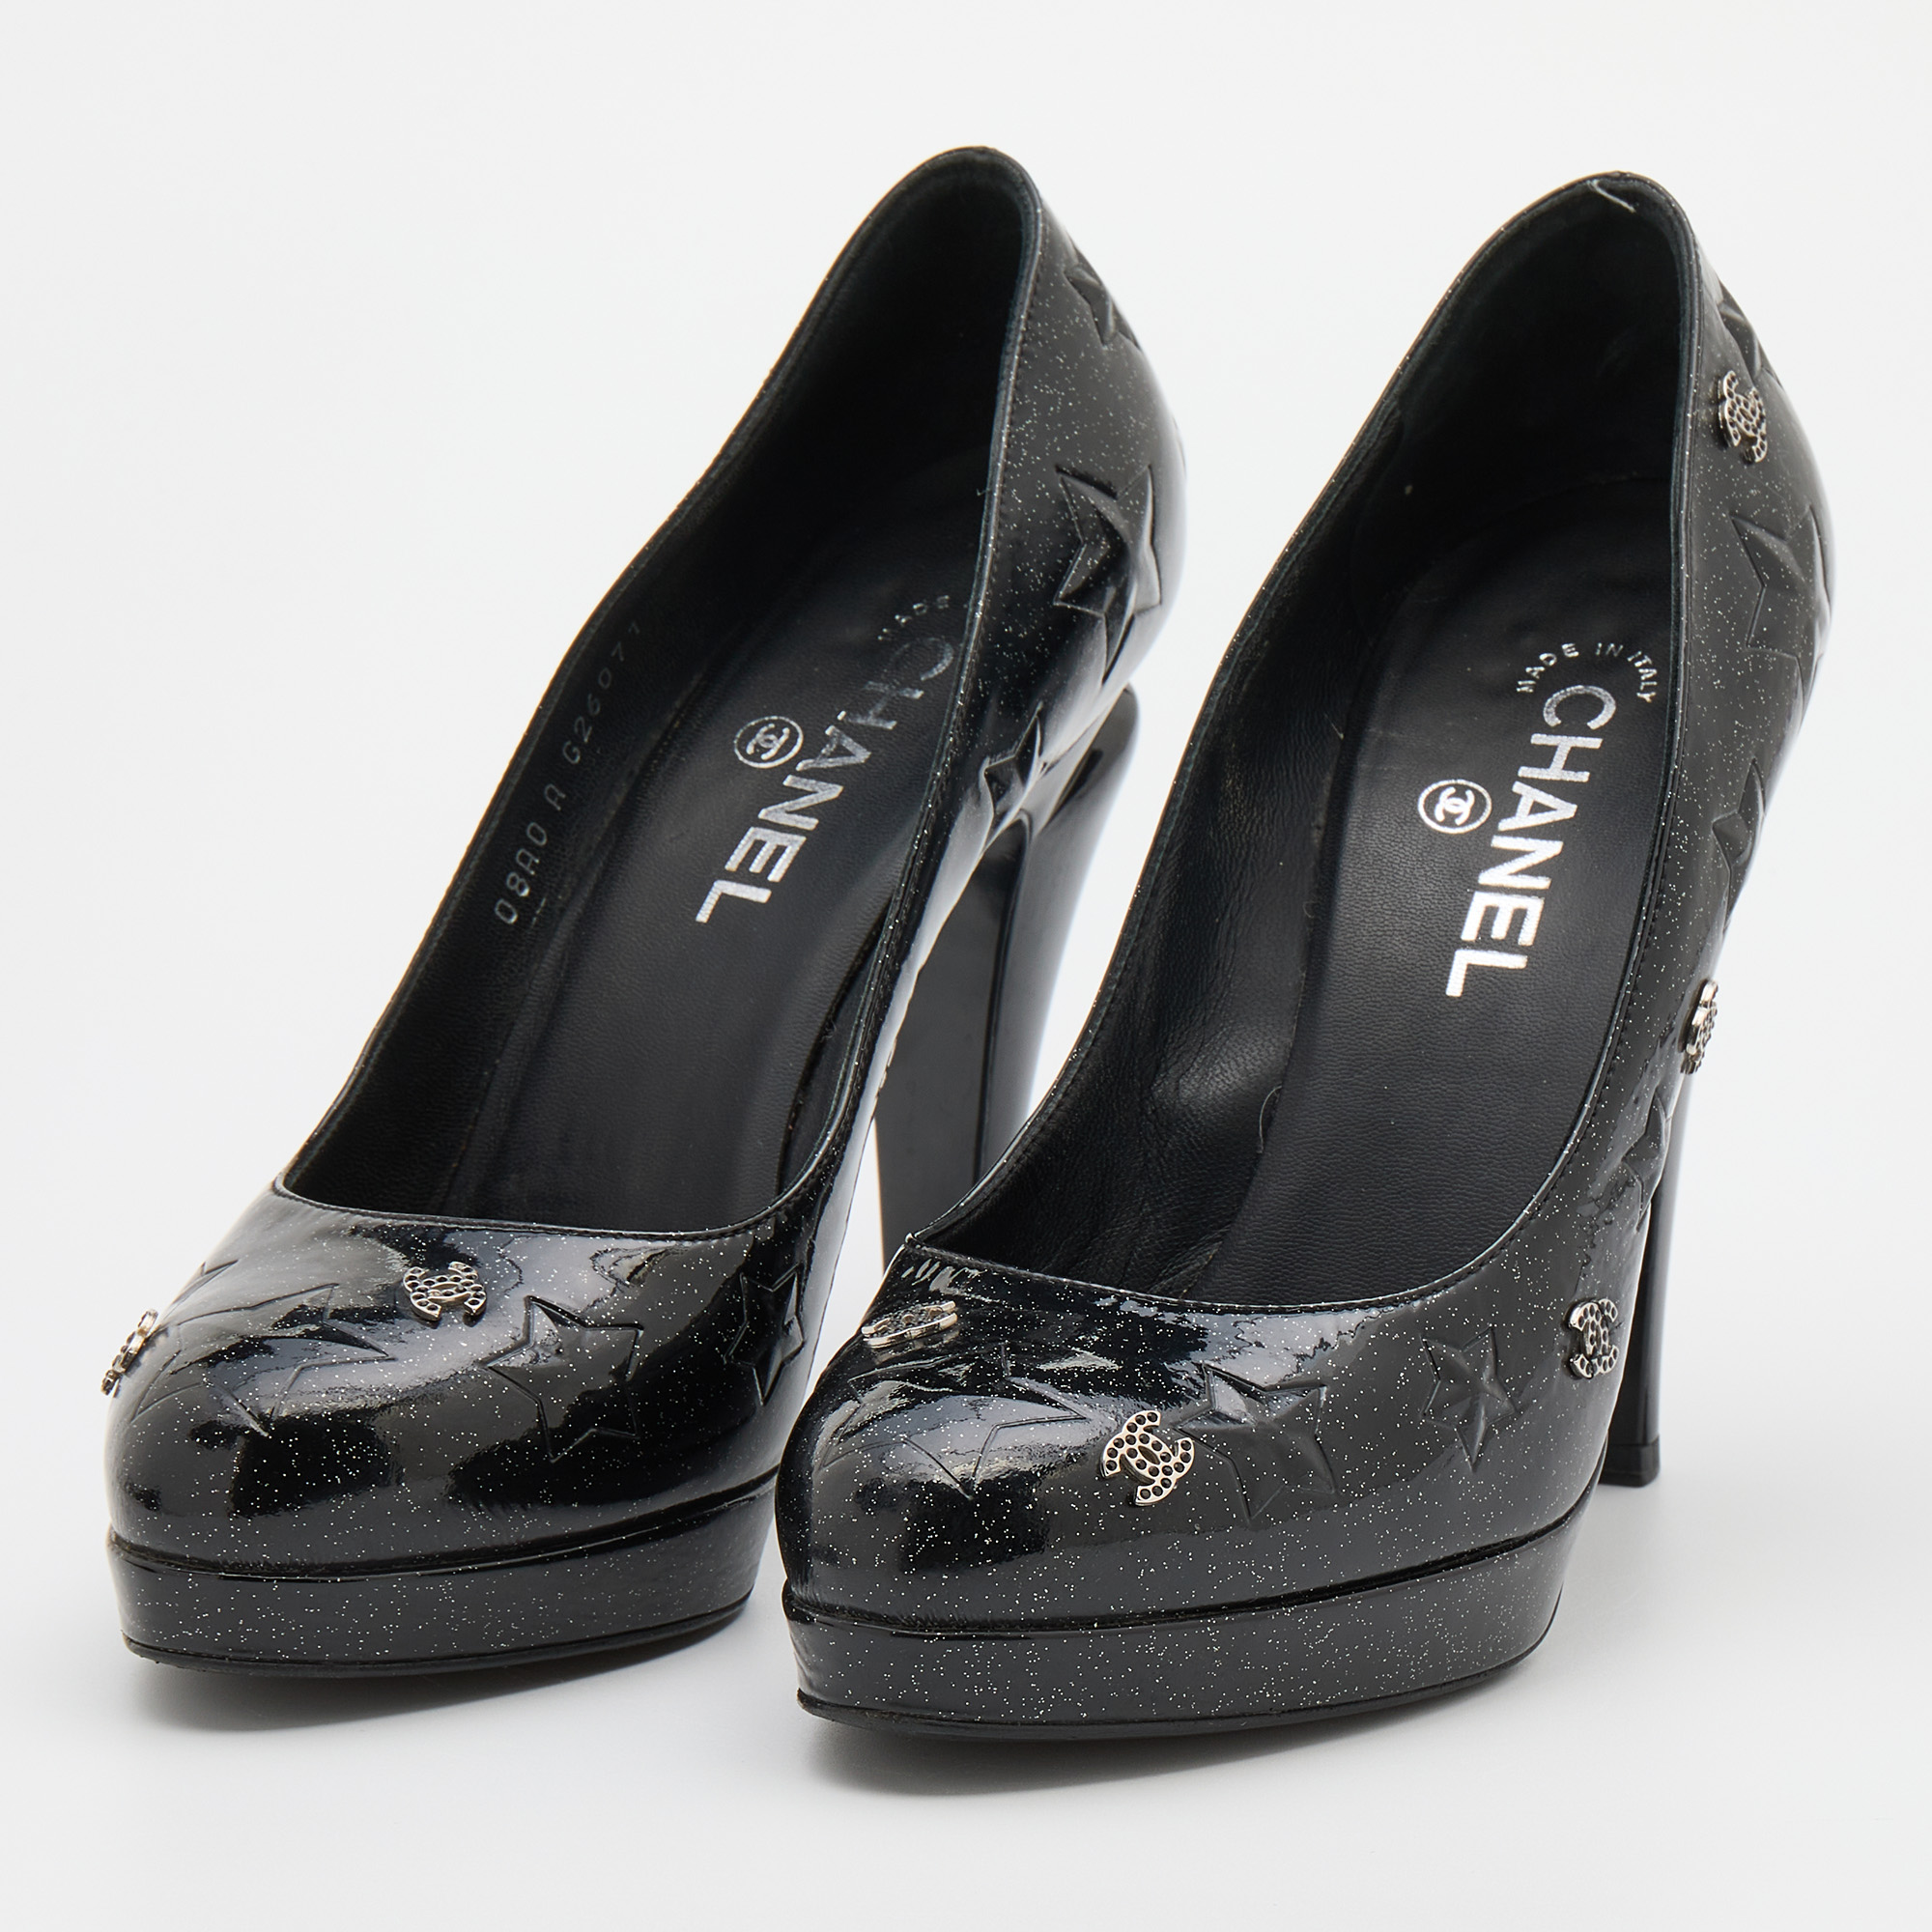 

Chanel Black Glitter Star Embossed Patent Leather CC Embellished Pumps Size